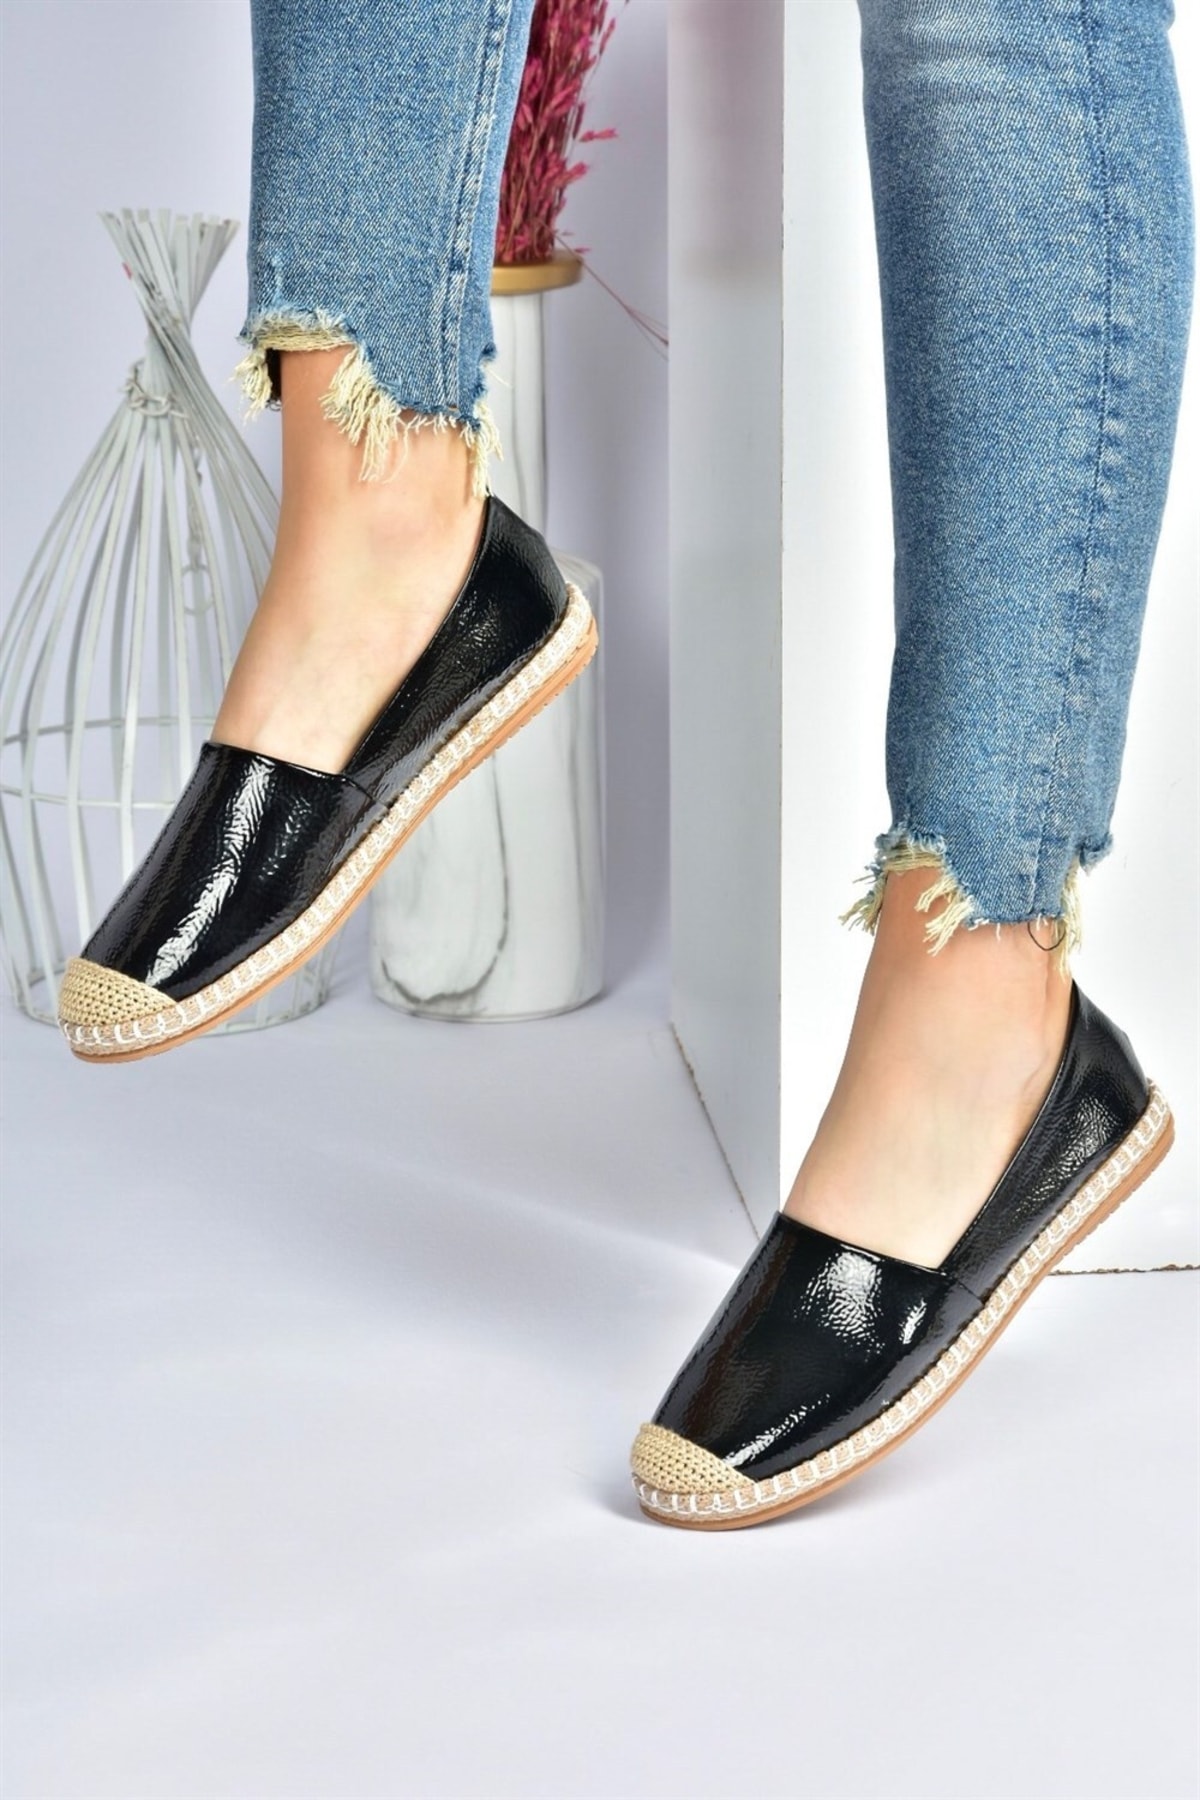 Fox Shoes Black Patent Leather Casual Women's Shoes